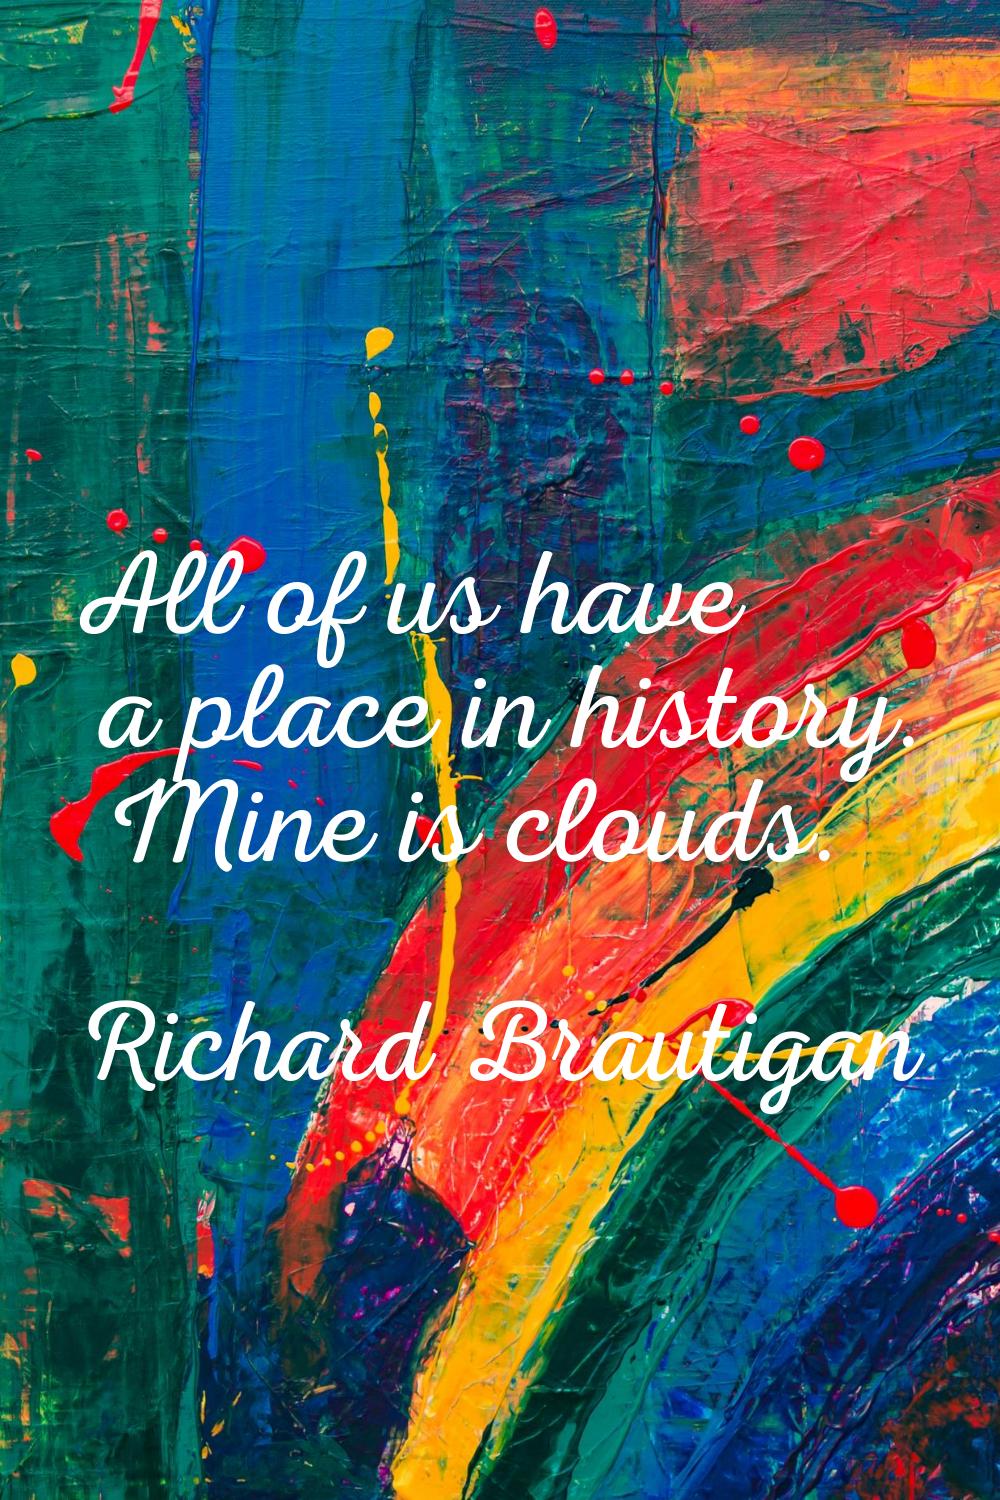 All of us have a place in history. Mine is clouds.